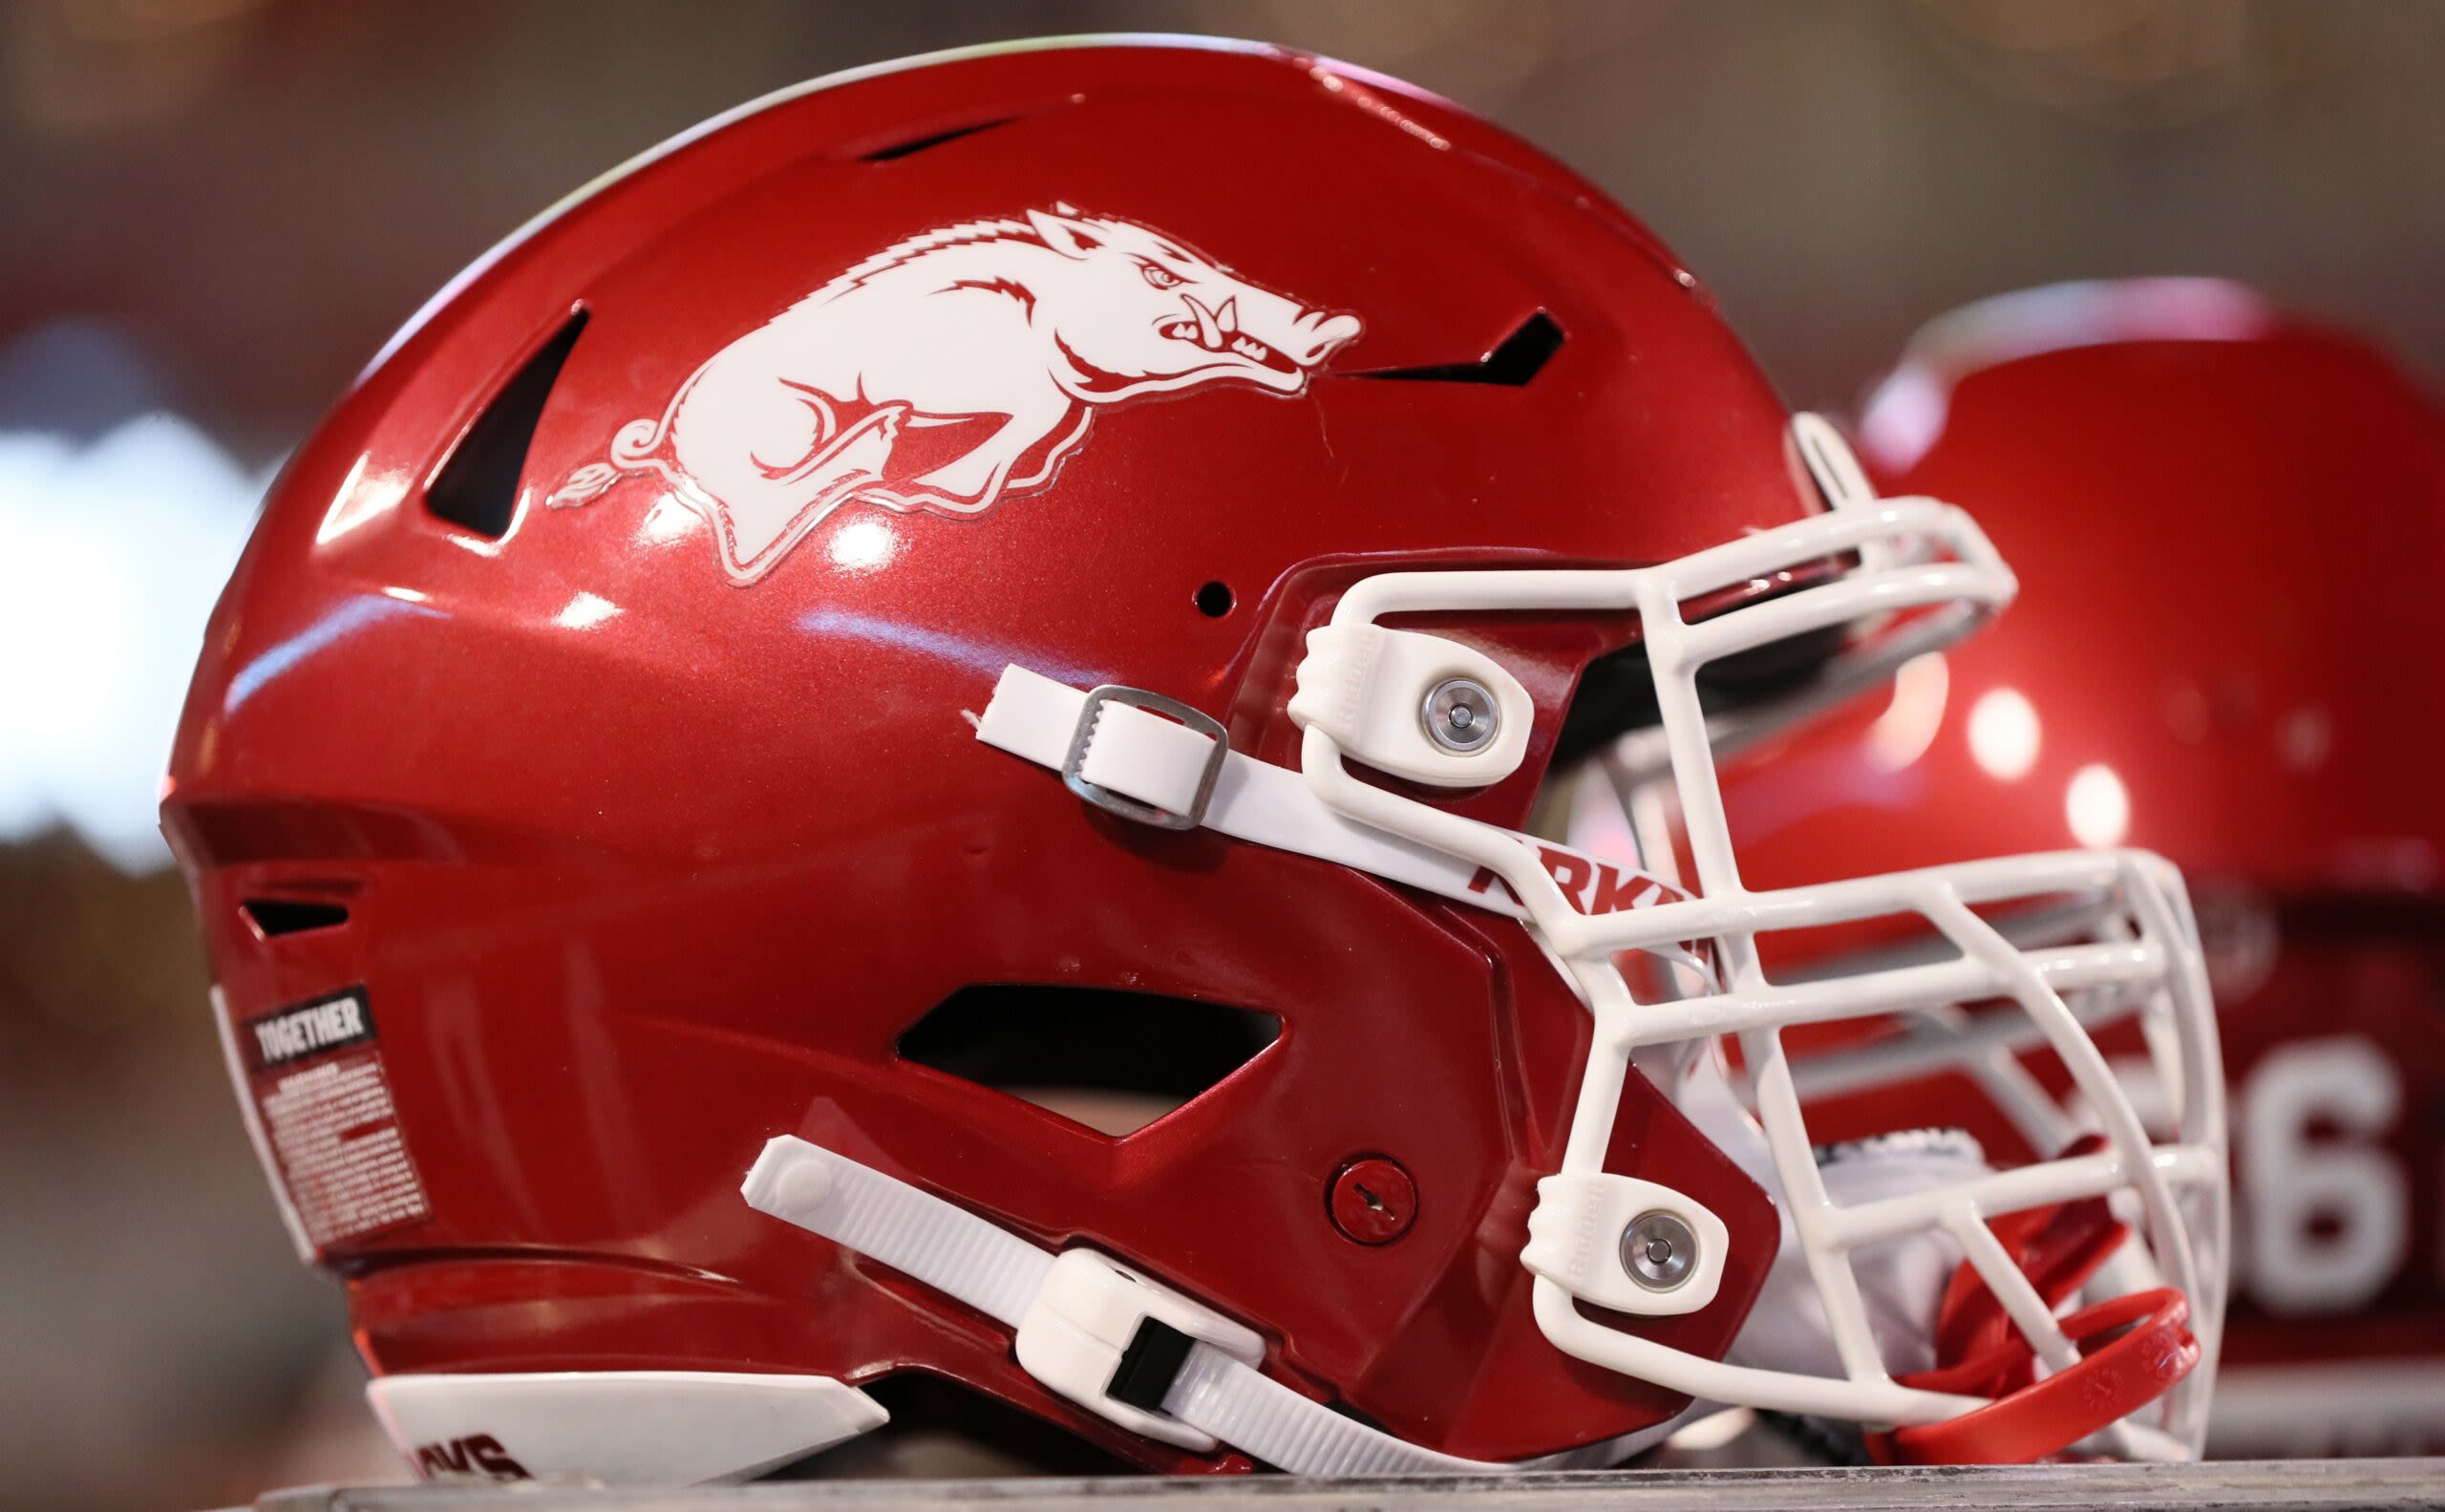 Arkansas coach says he lives in ‘constant state of paranoia’ over roster-poaching